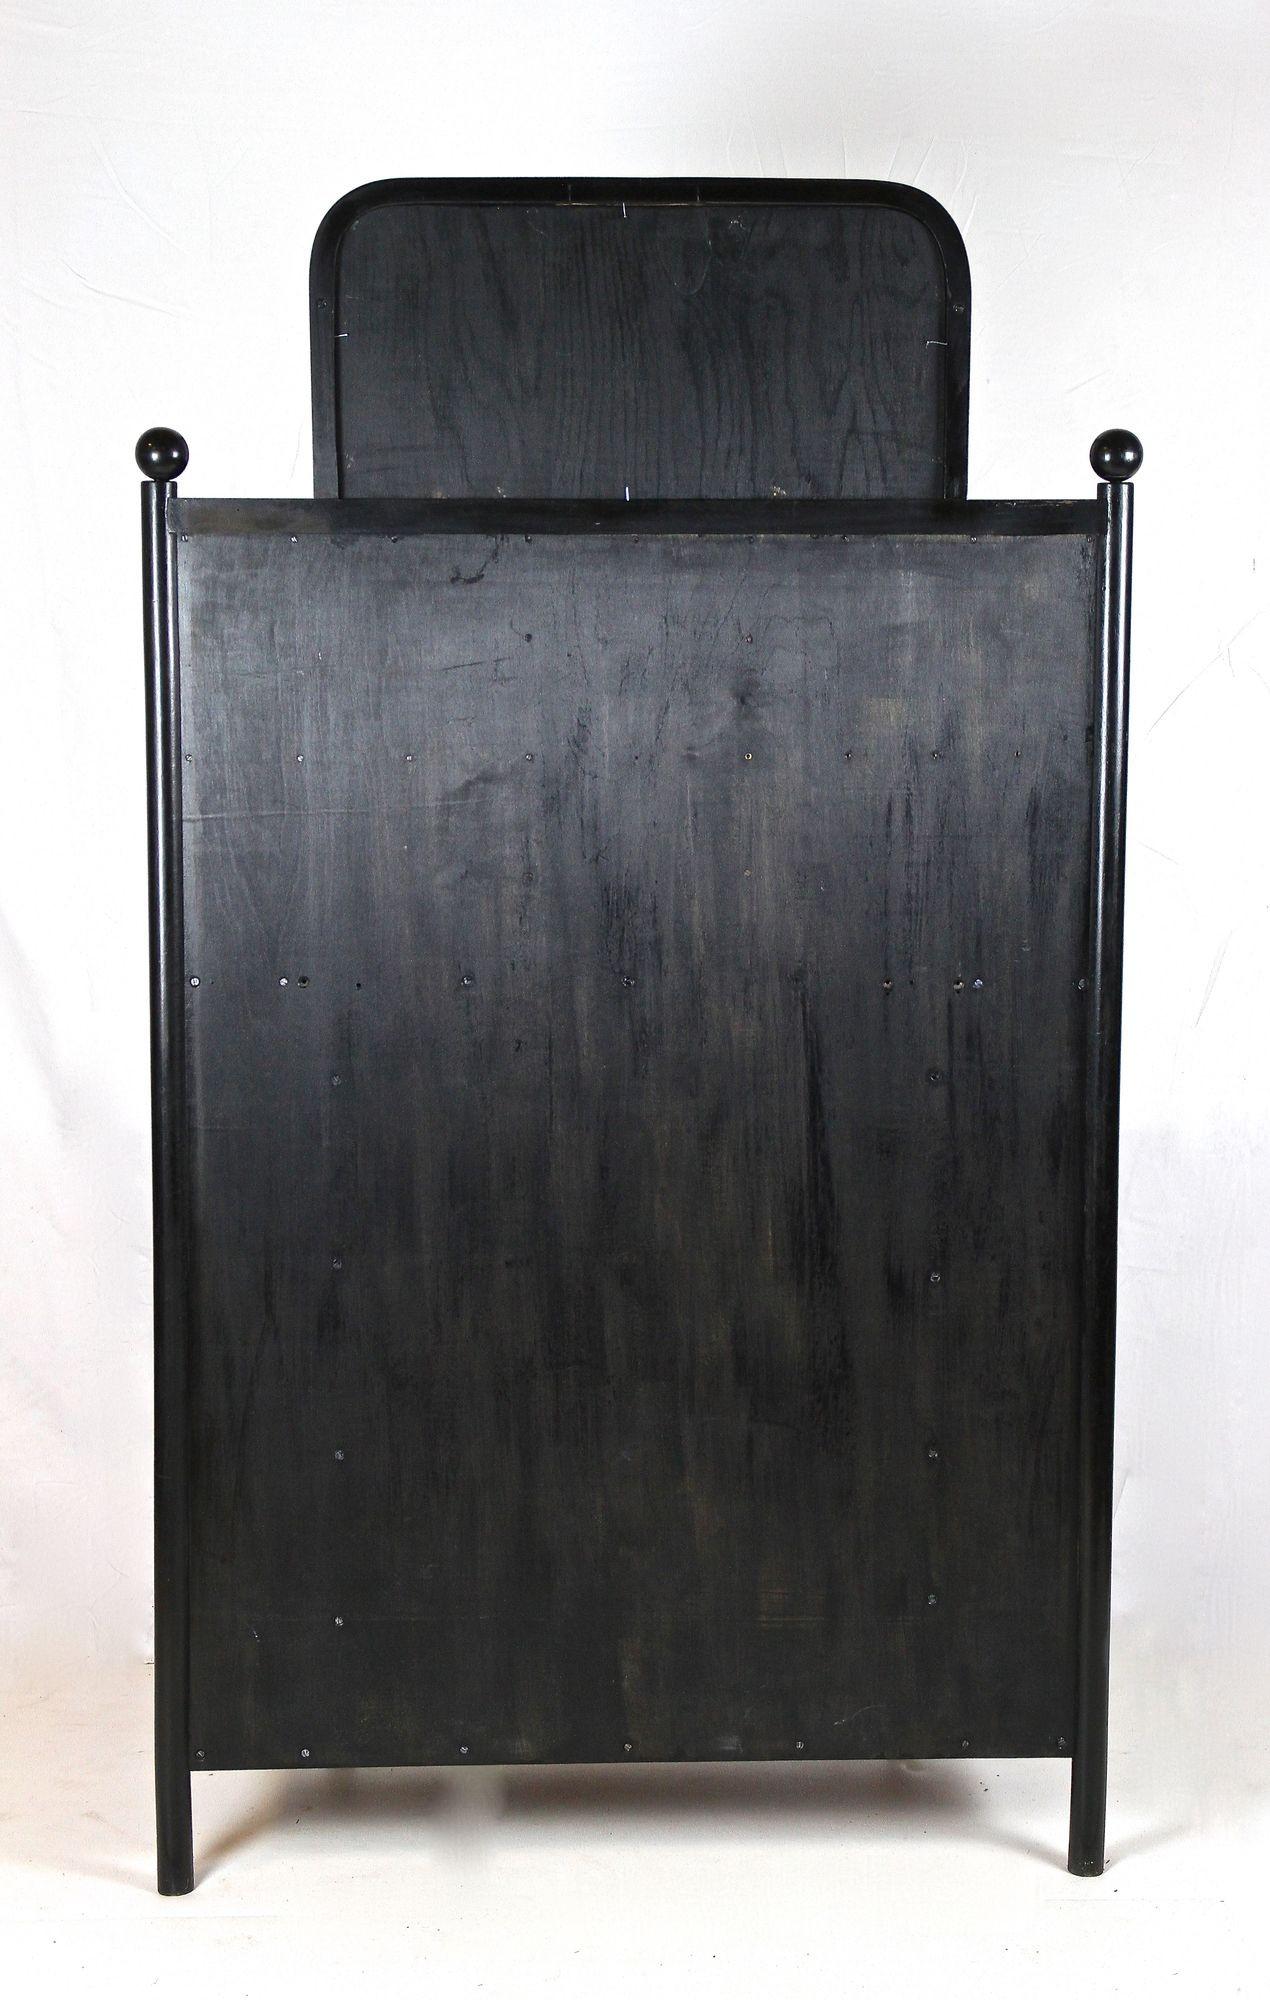 Black Art Nouveau Display Cabinet by Josef Hoffmann for Thonet, AT ca. 1905 For Sale 7